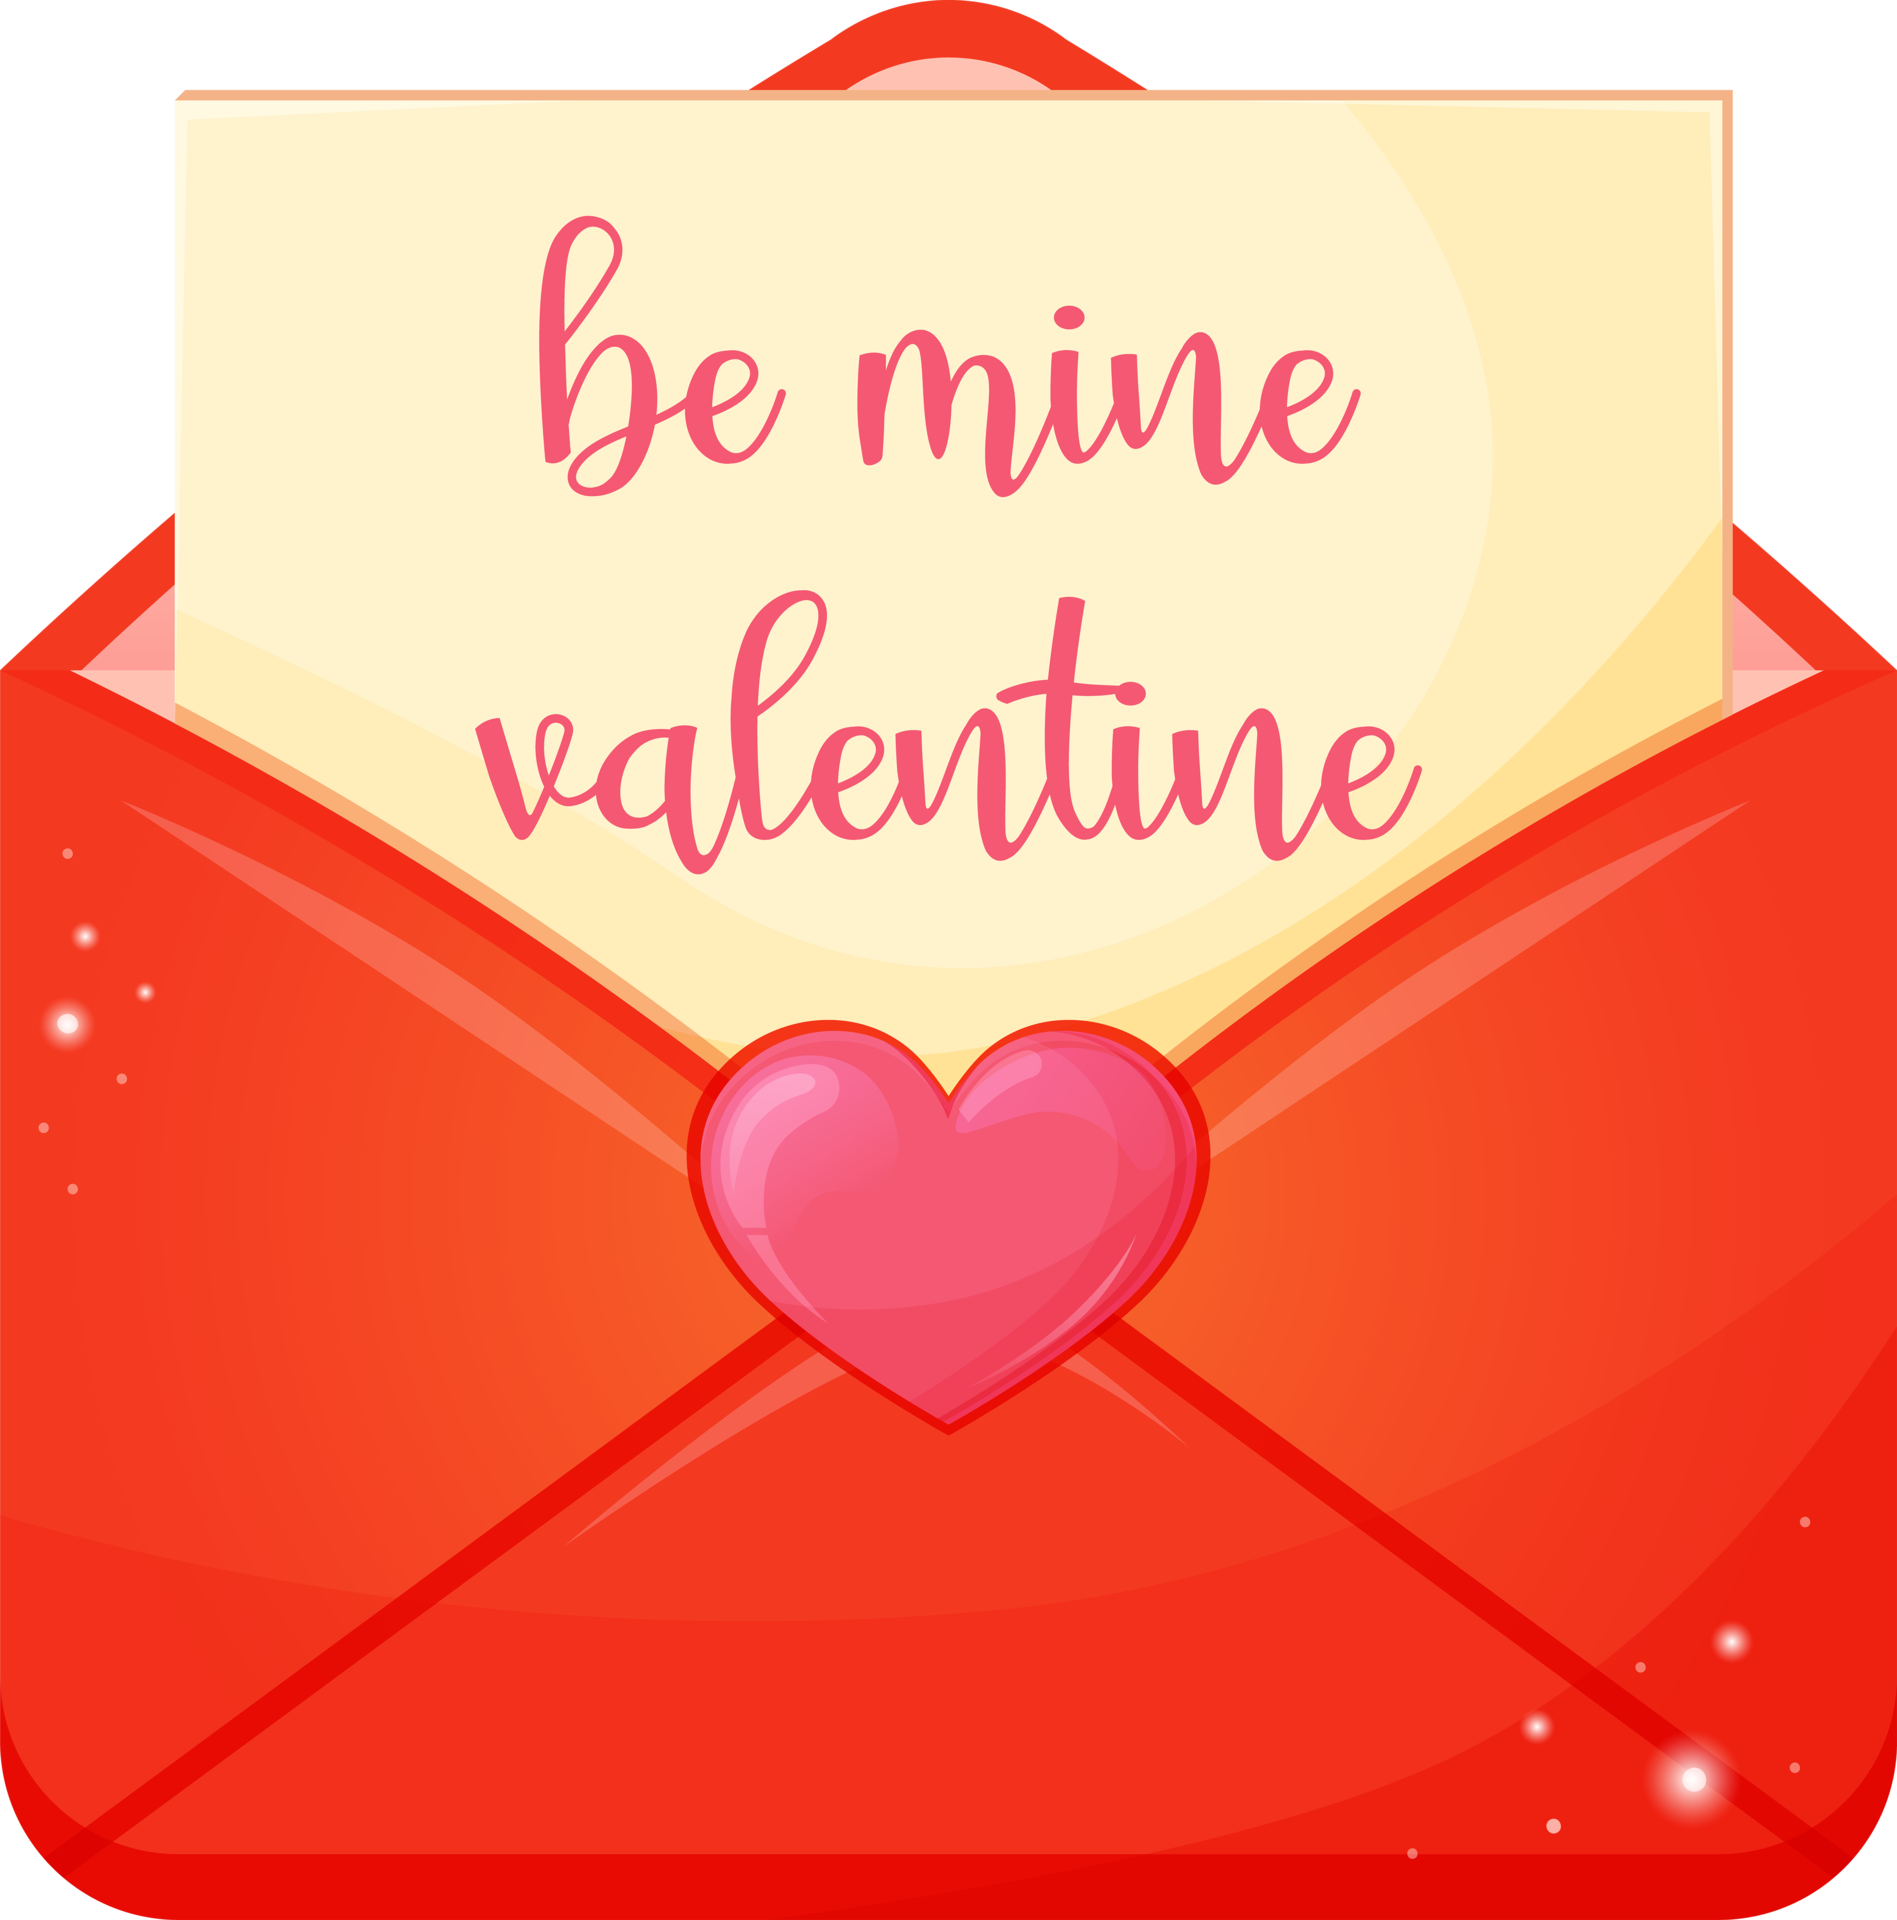 Vintage Valentine Stickers, Valentines Day, Love Valentines Day, Valentine  S Day PNG Transparent Image and Clipart for Free Download